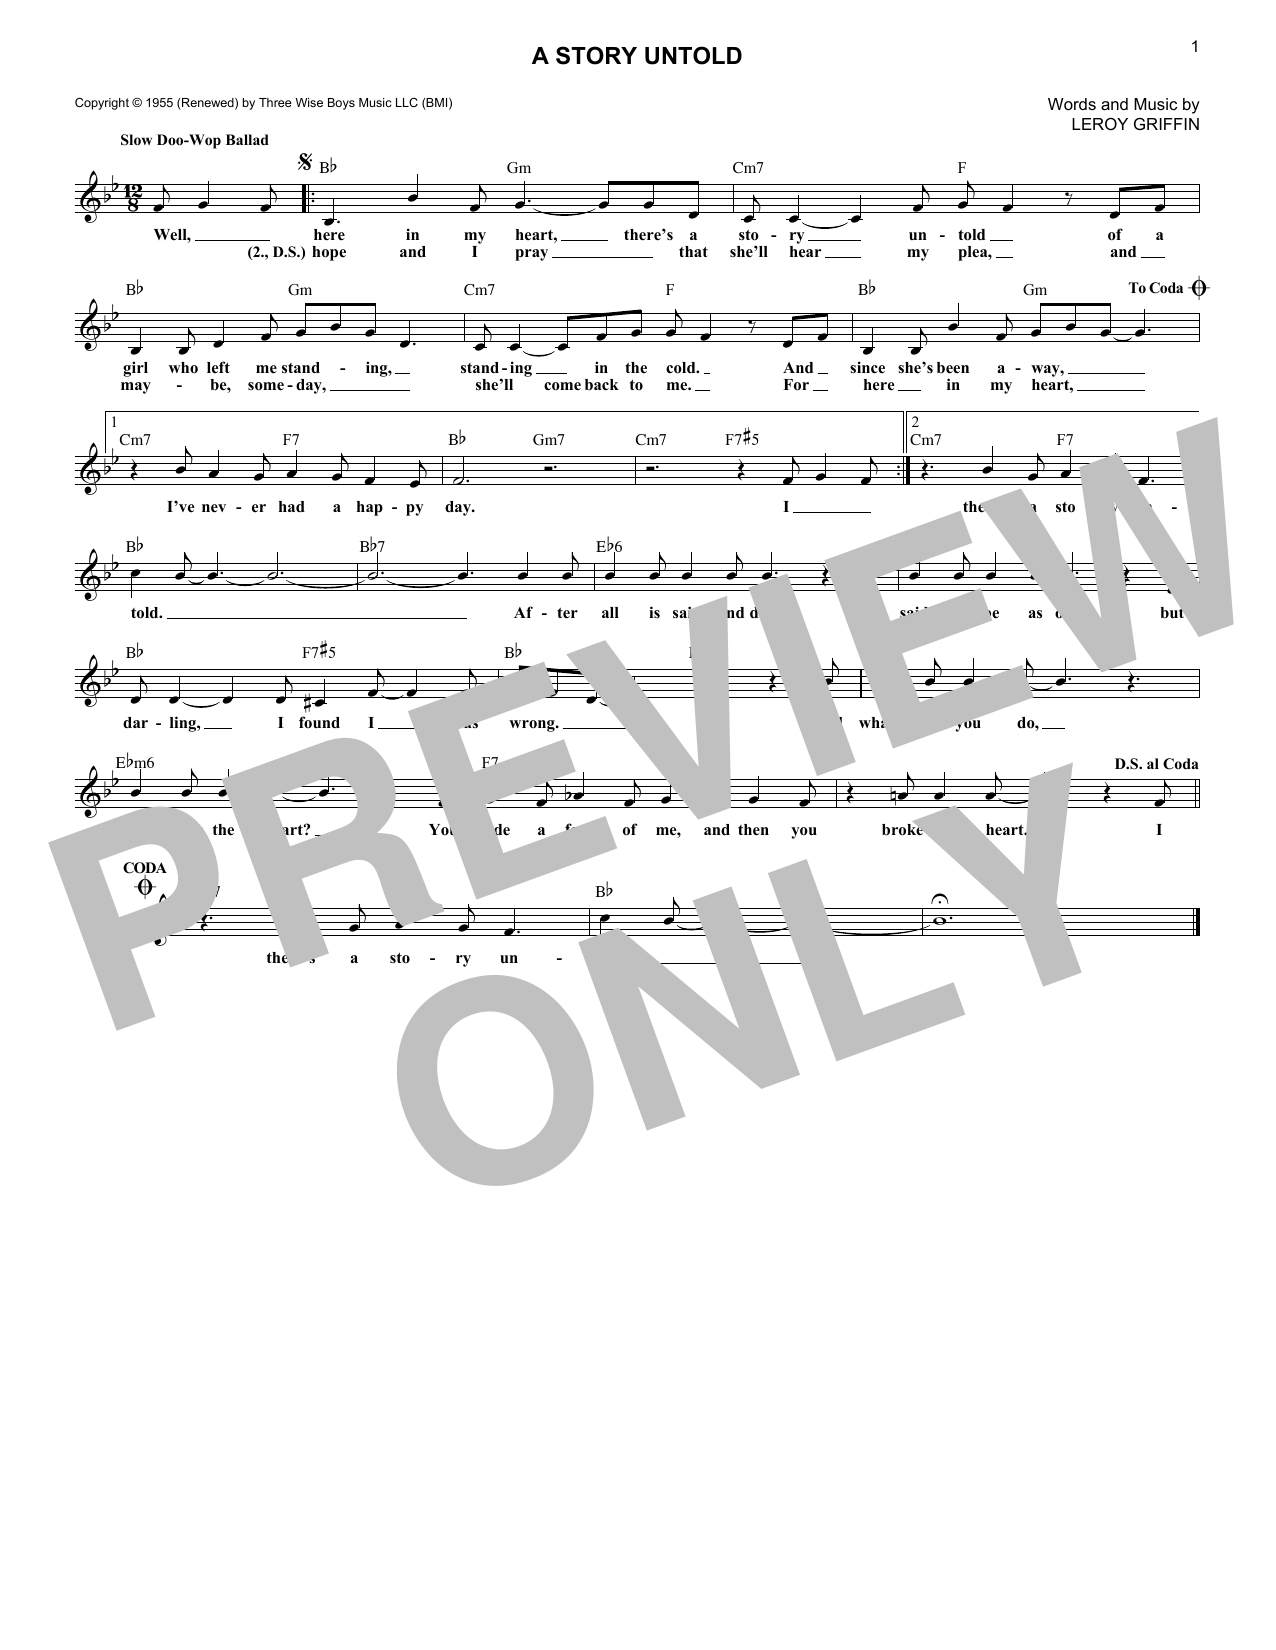 Leroy Griffin A Story Untold sheet music notes and chords. Download Printable PDF.